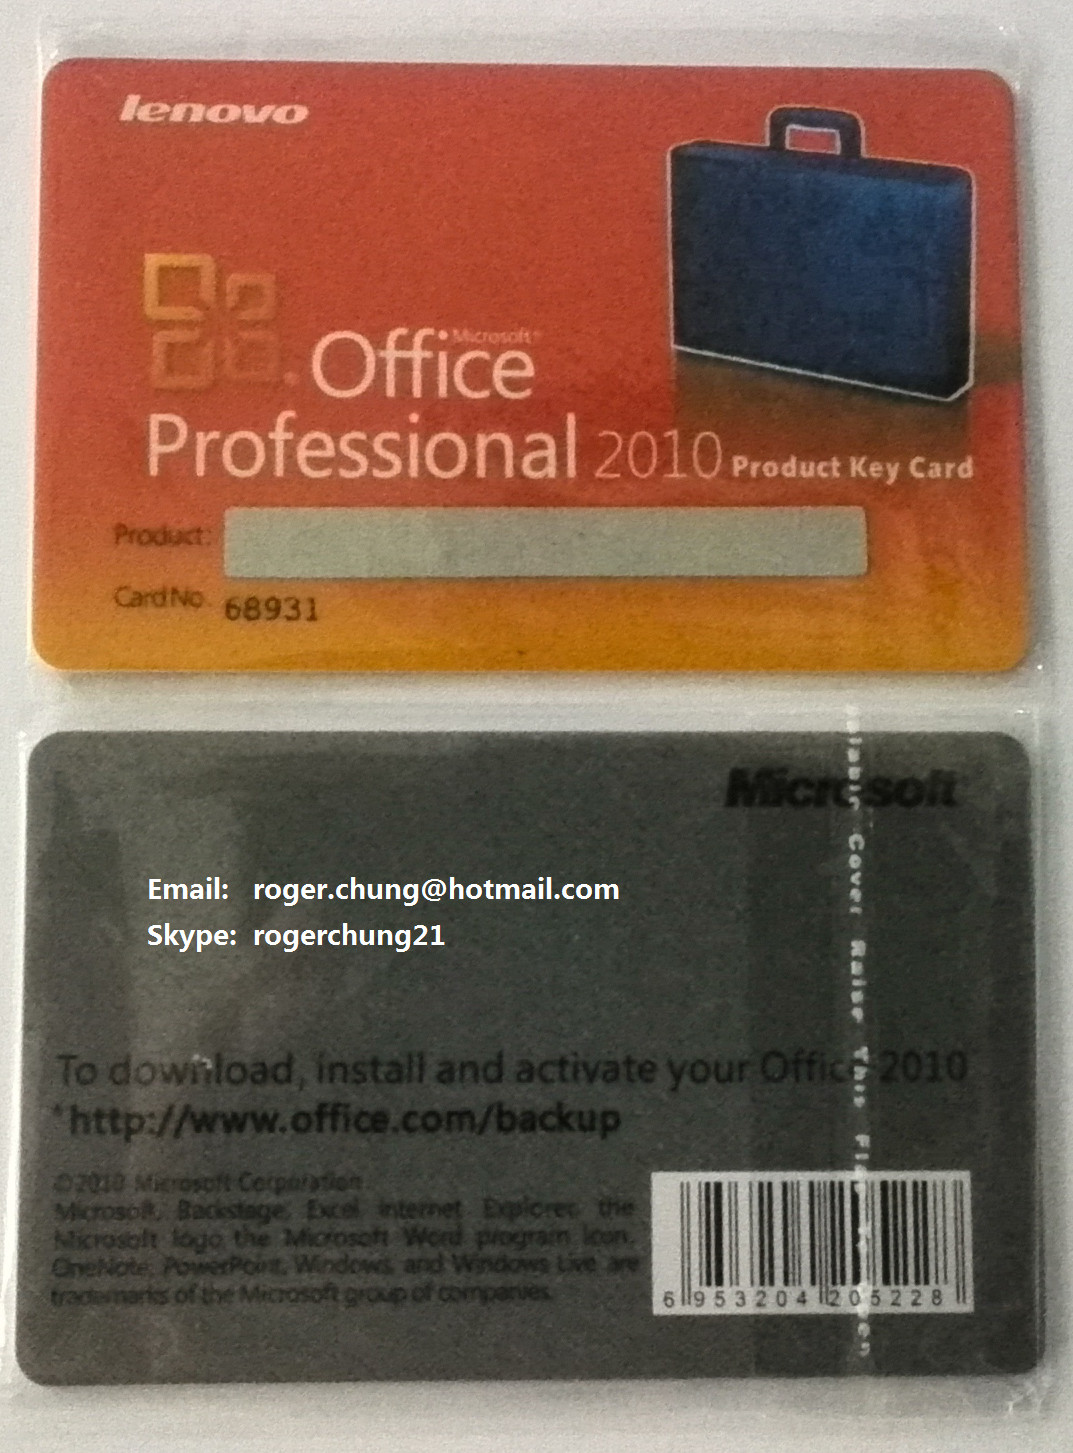 Microsoft Office 2010 Professional Lenovo Key Cards with free shipping